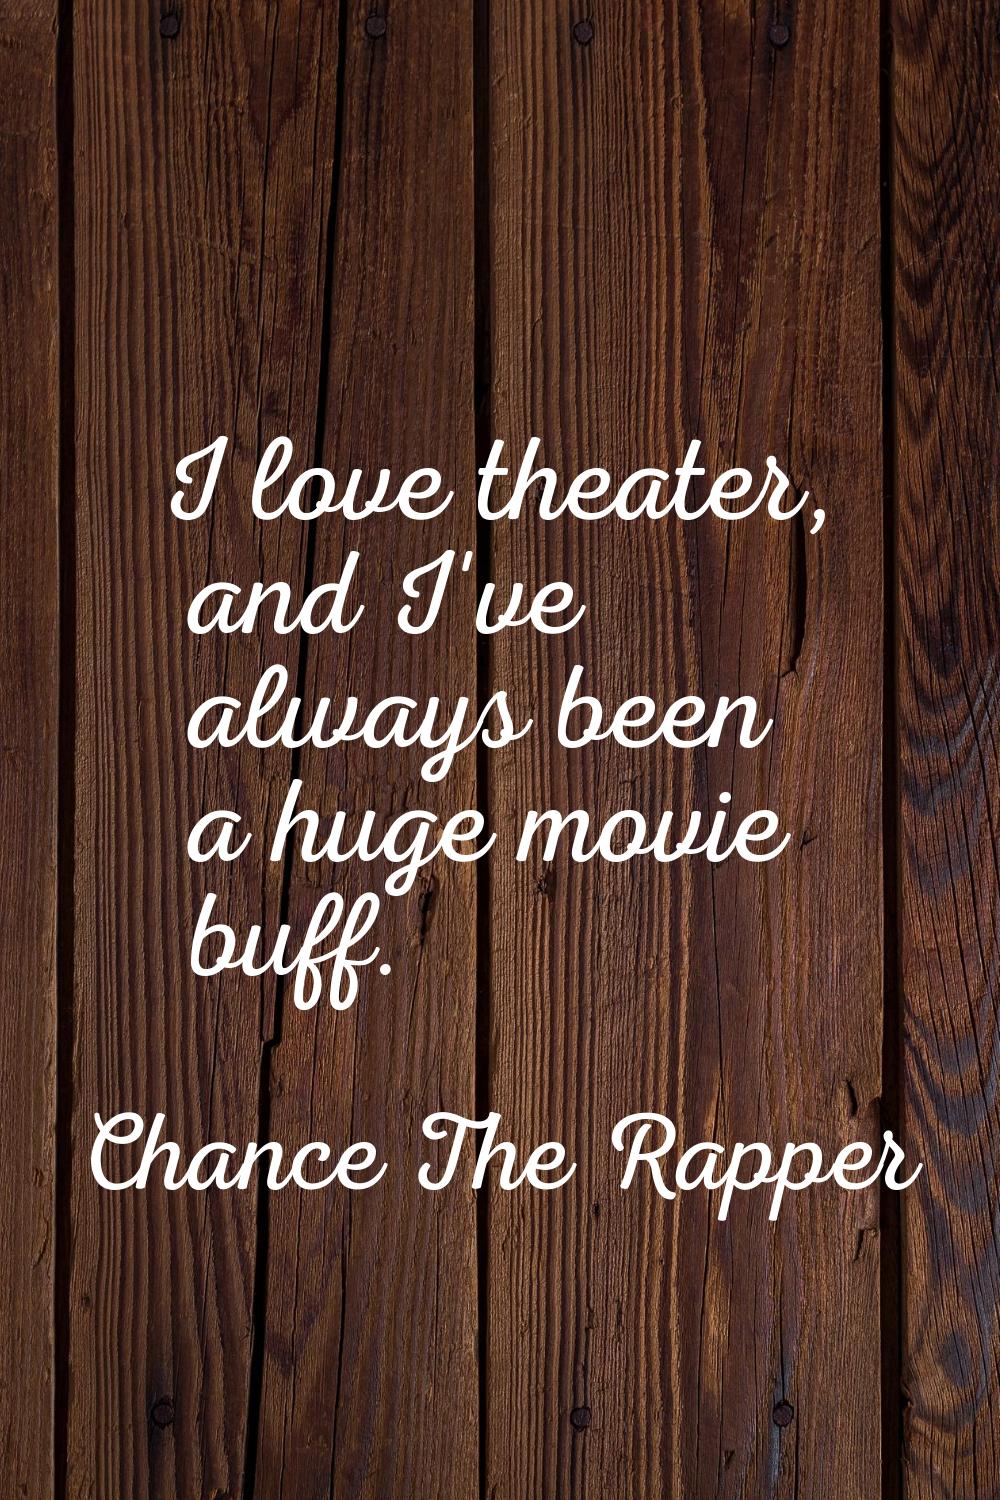 I love theater, and I've always been a huge movie buff.